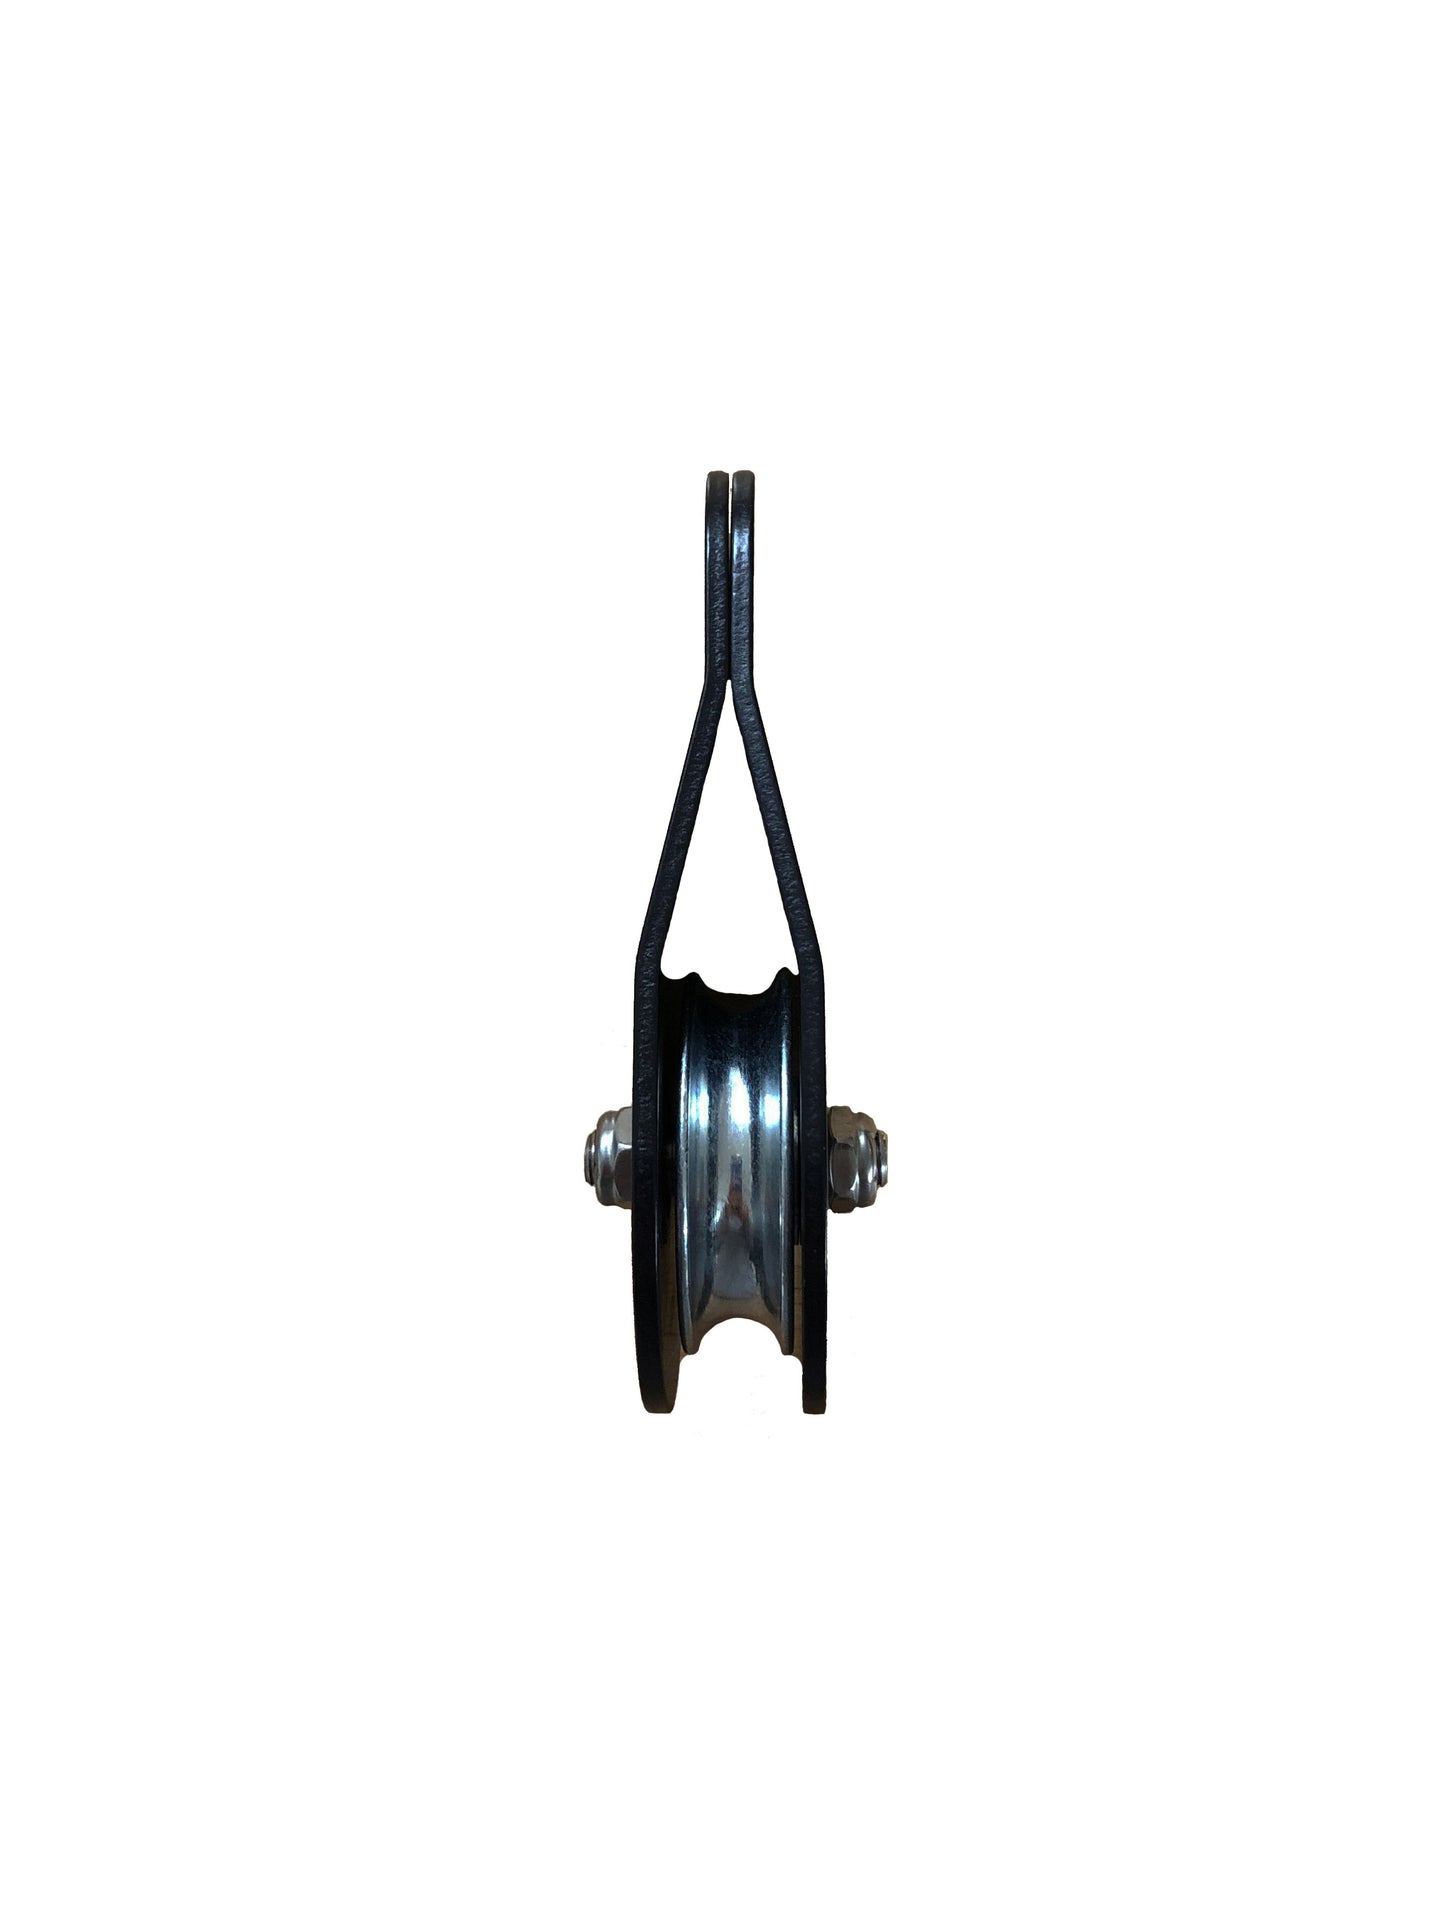 CMI 2" Service Line Pulley (RP114)